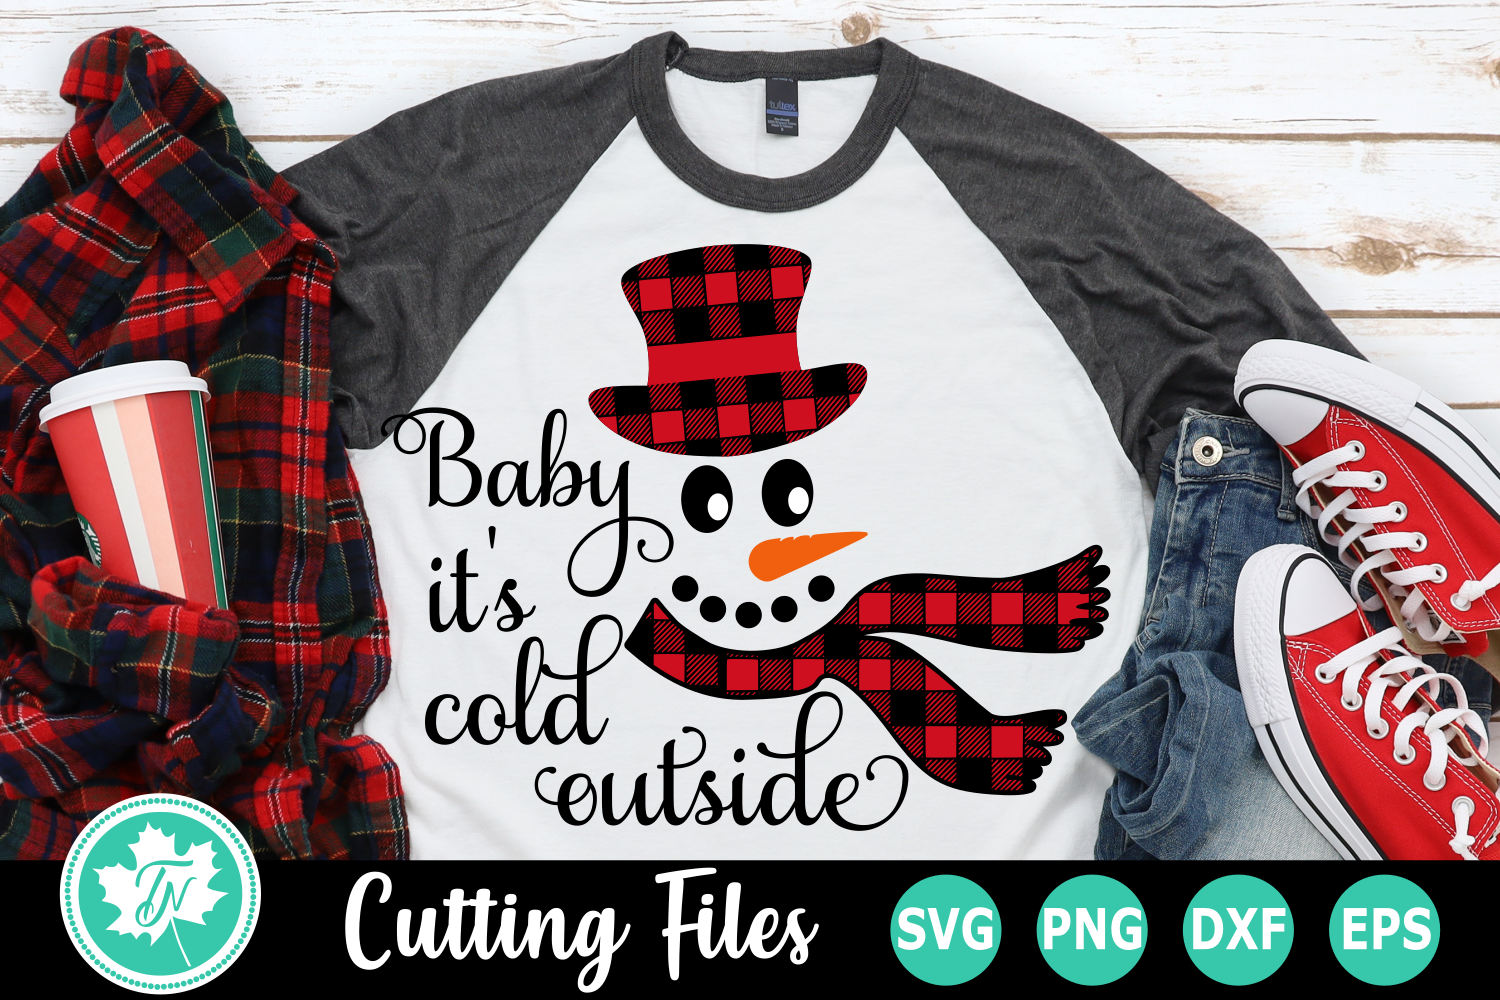 Baby It's Cold Outside Snowman - A Christmas SVG Cut File